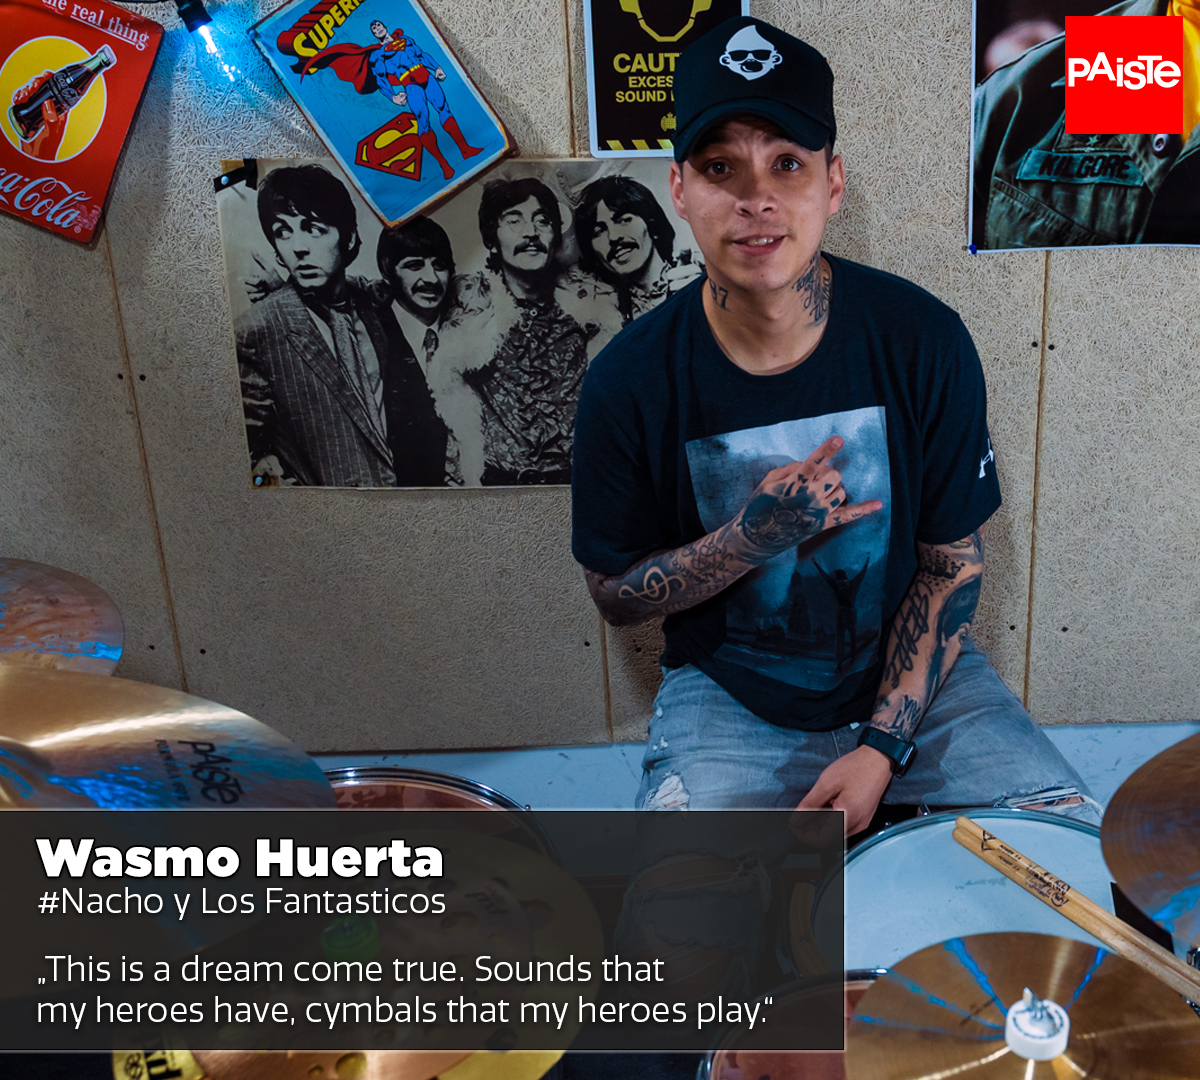 For Paiste Artist Wasmo Huerta a dream came true. Who’s also been playing Paiste from an early age? ❤️

#paistecymbals #paiste #cymbals #paisteartist #paistefamily